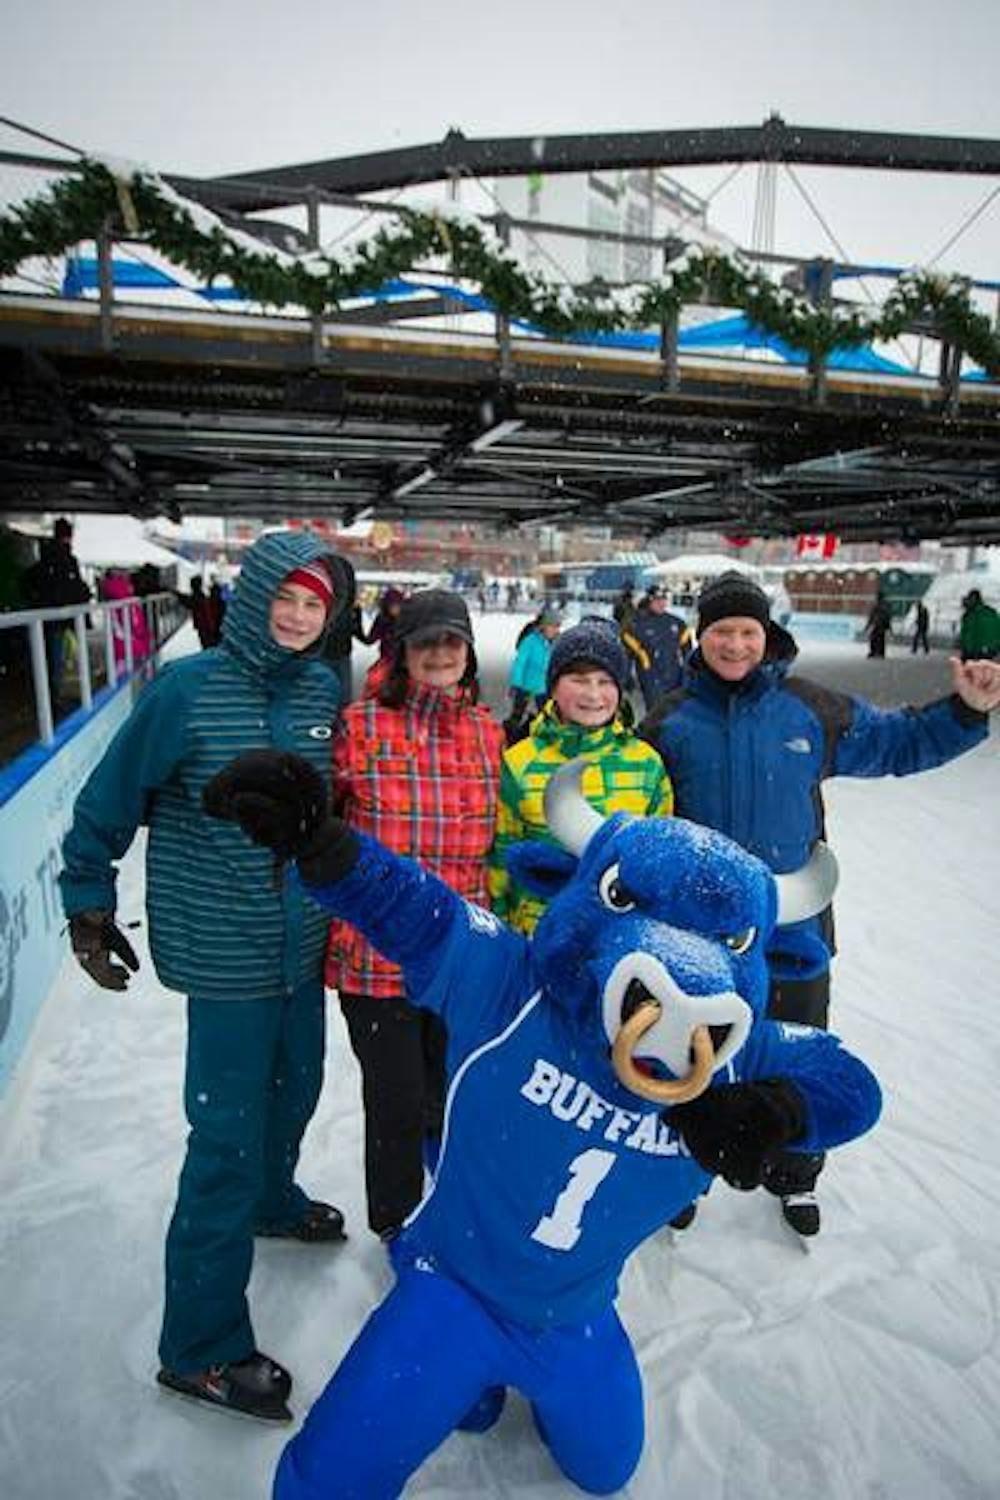 <p>UB Alumni Association helped host an event at Canalside last winter. All UB alumni will soon be able to attend all Association events without having to pay a membership fee.</p>